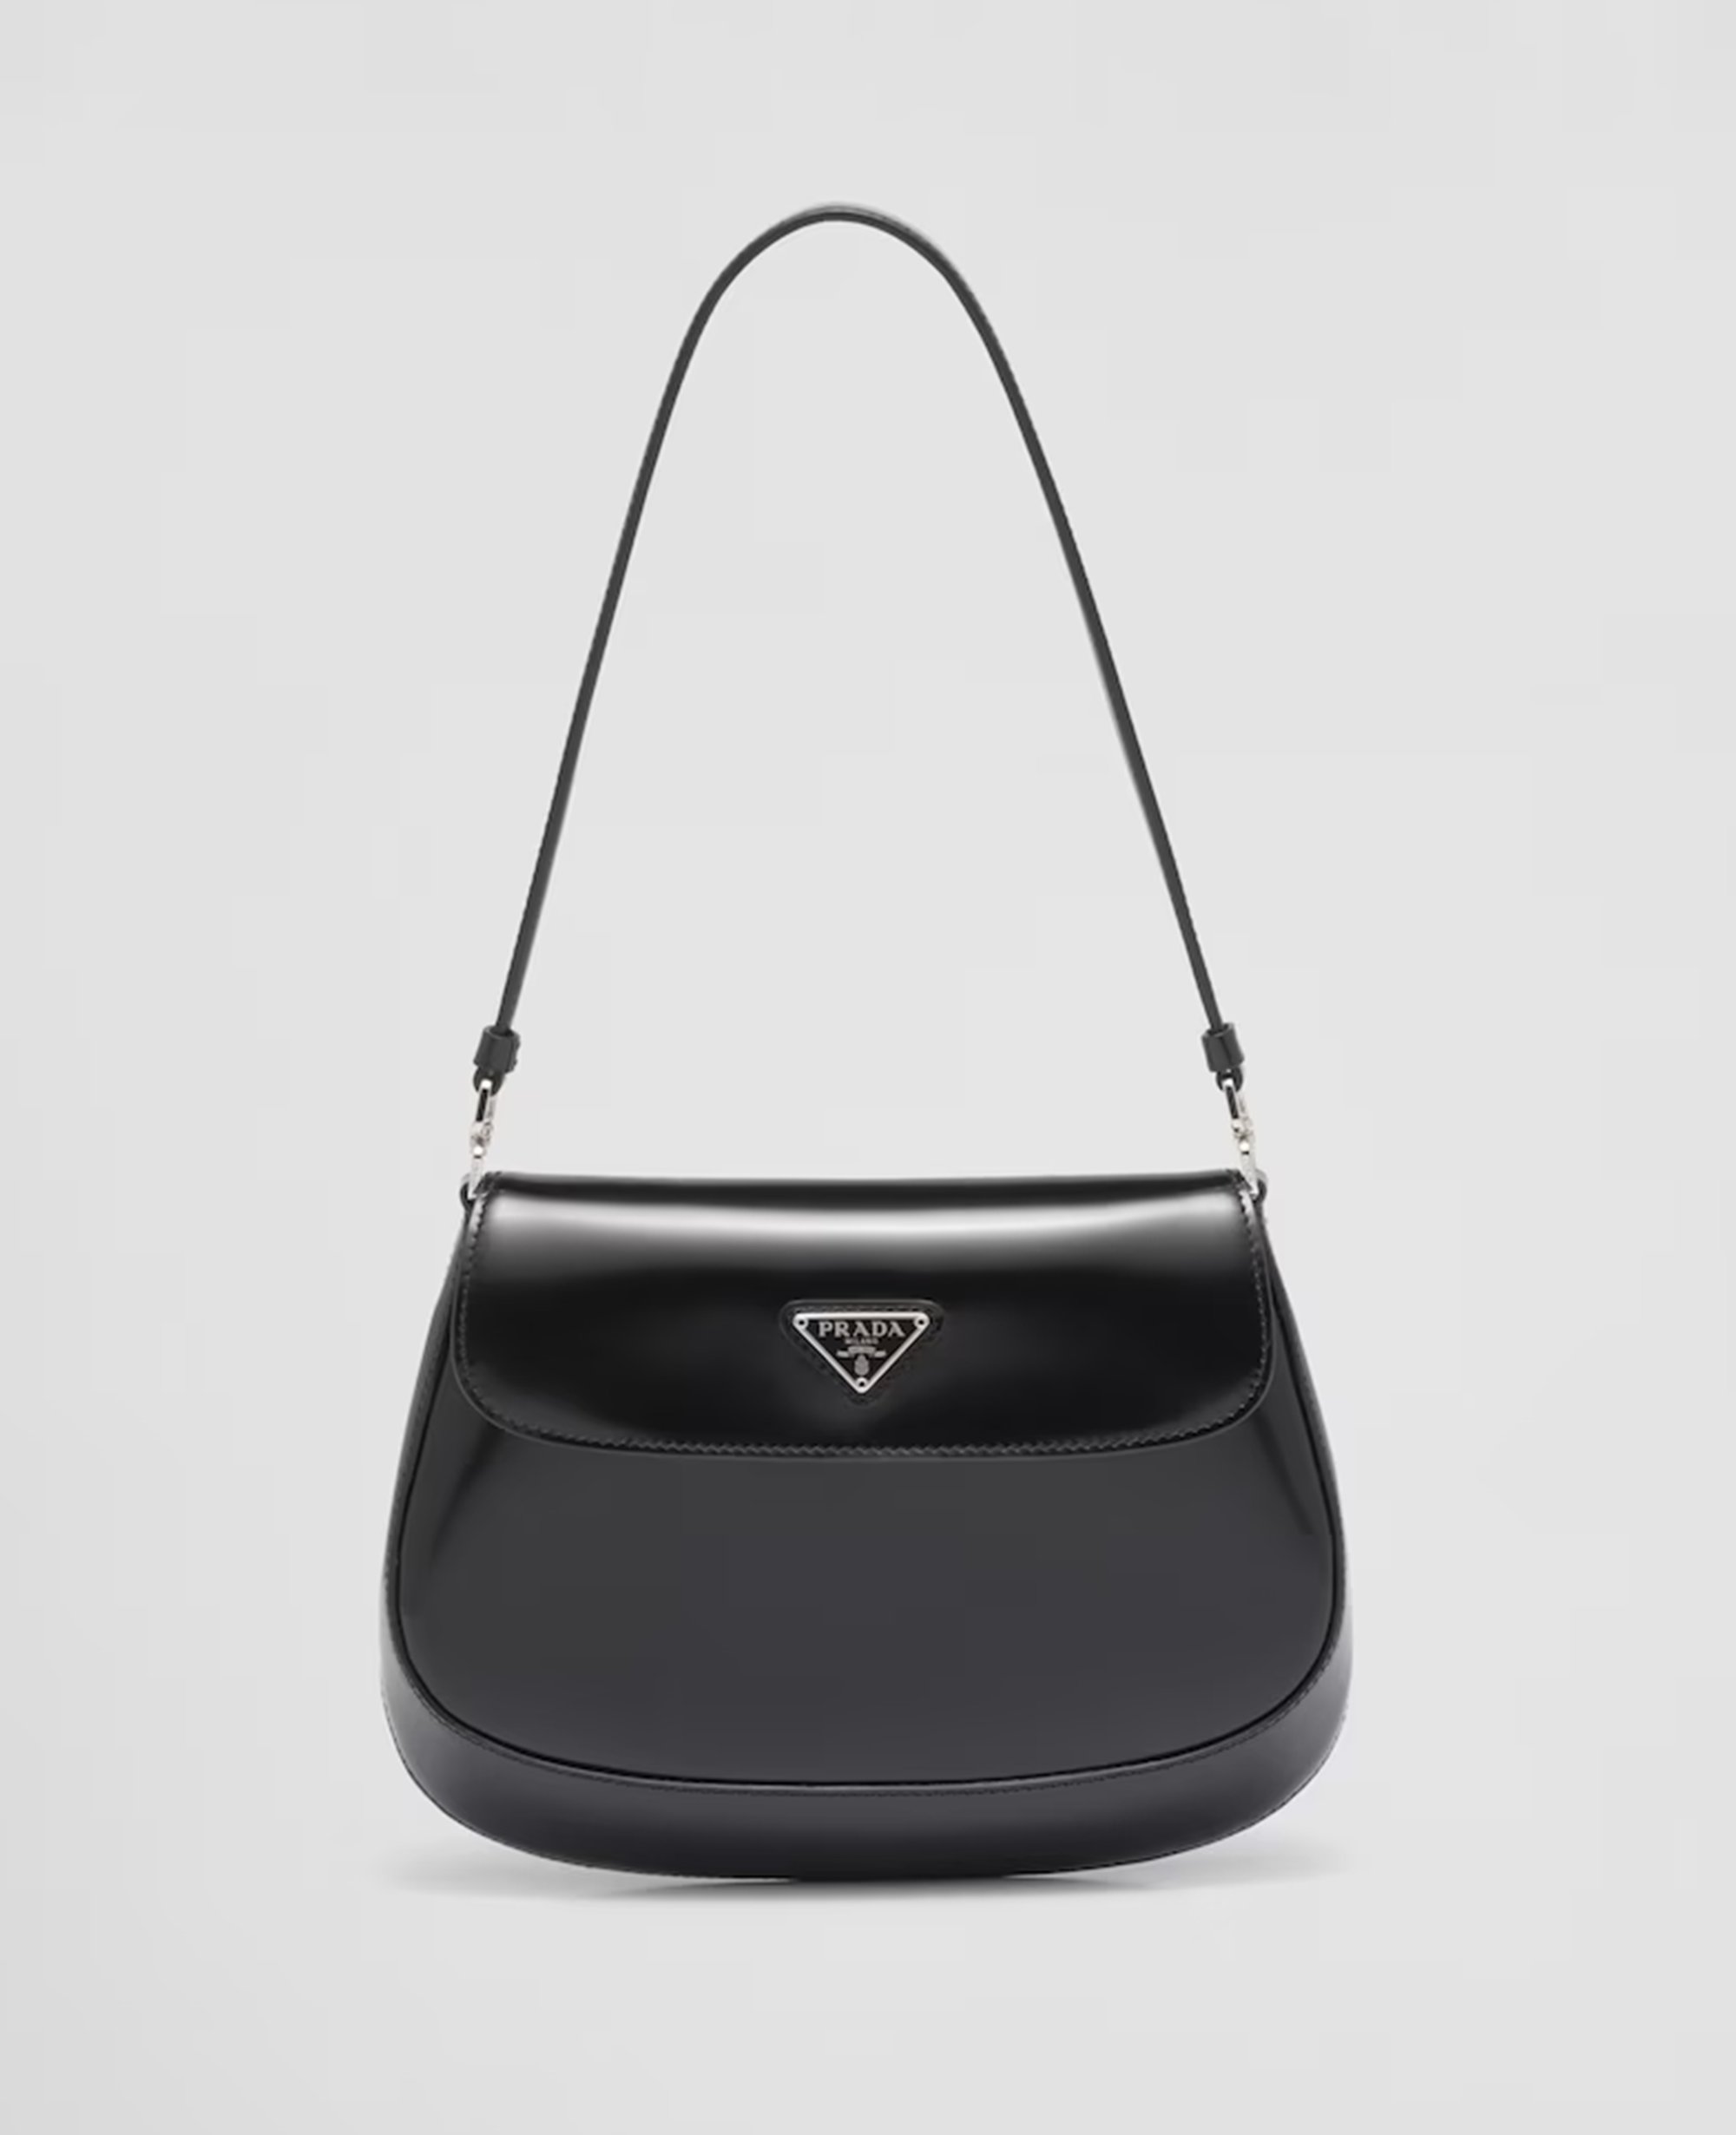 5 Prada Bag Dupes That'll Save You Cash & Look Cute for Summer – StyleCaster